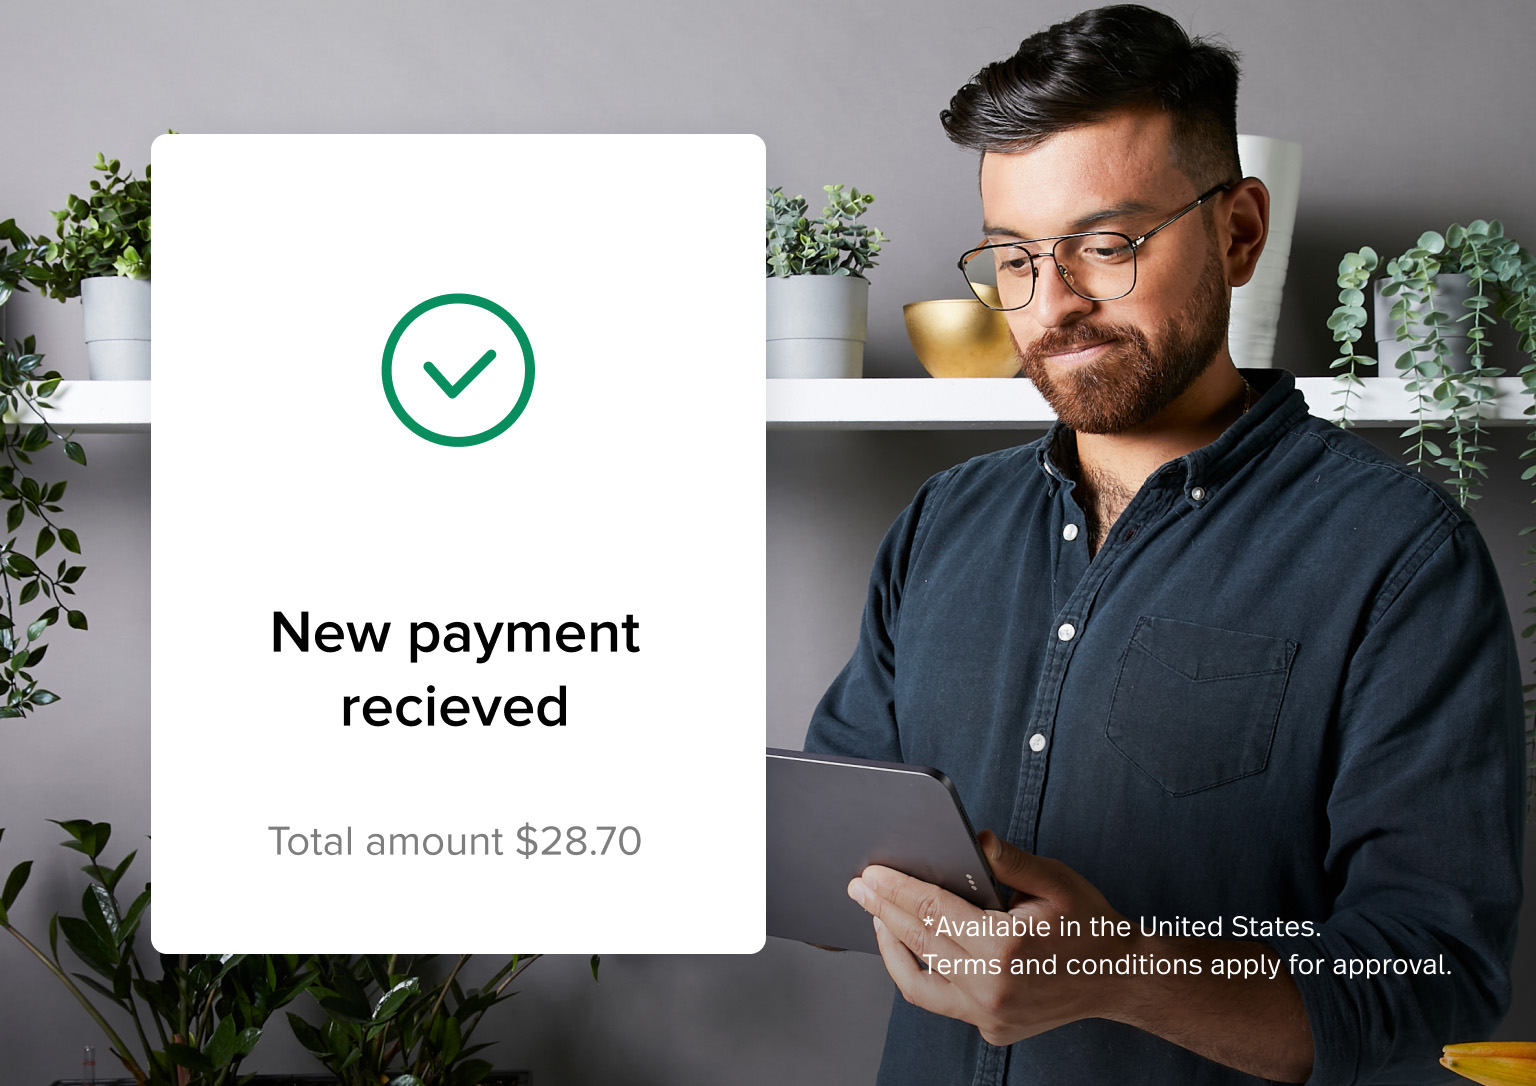 Built-in payments—fast, secure and effortless